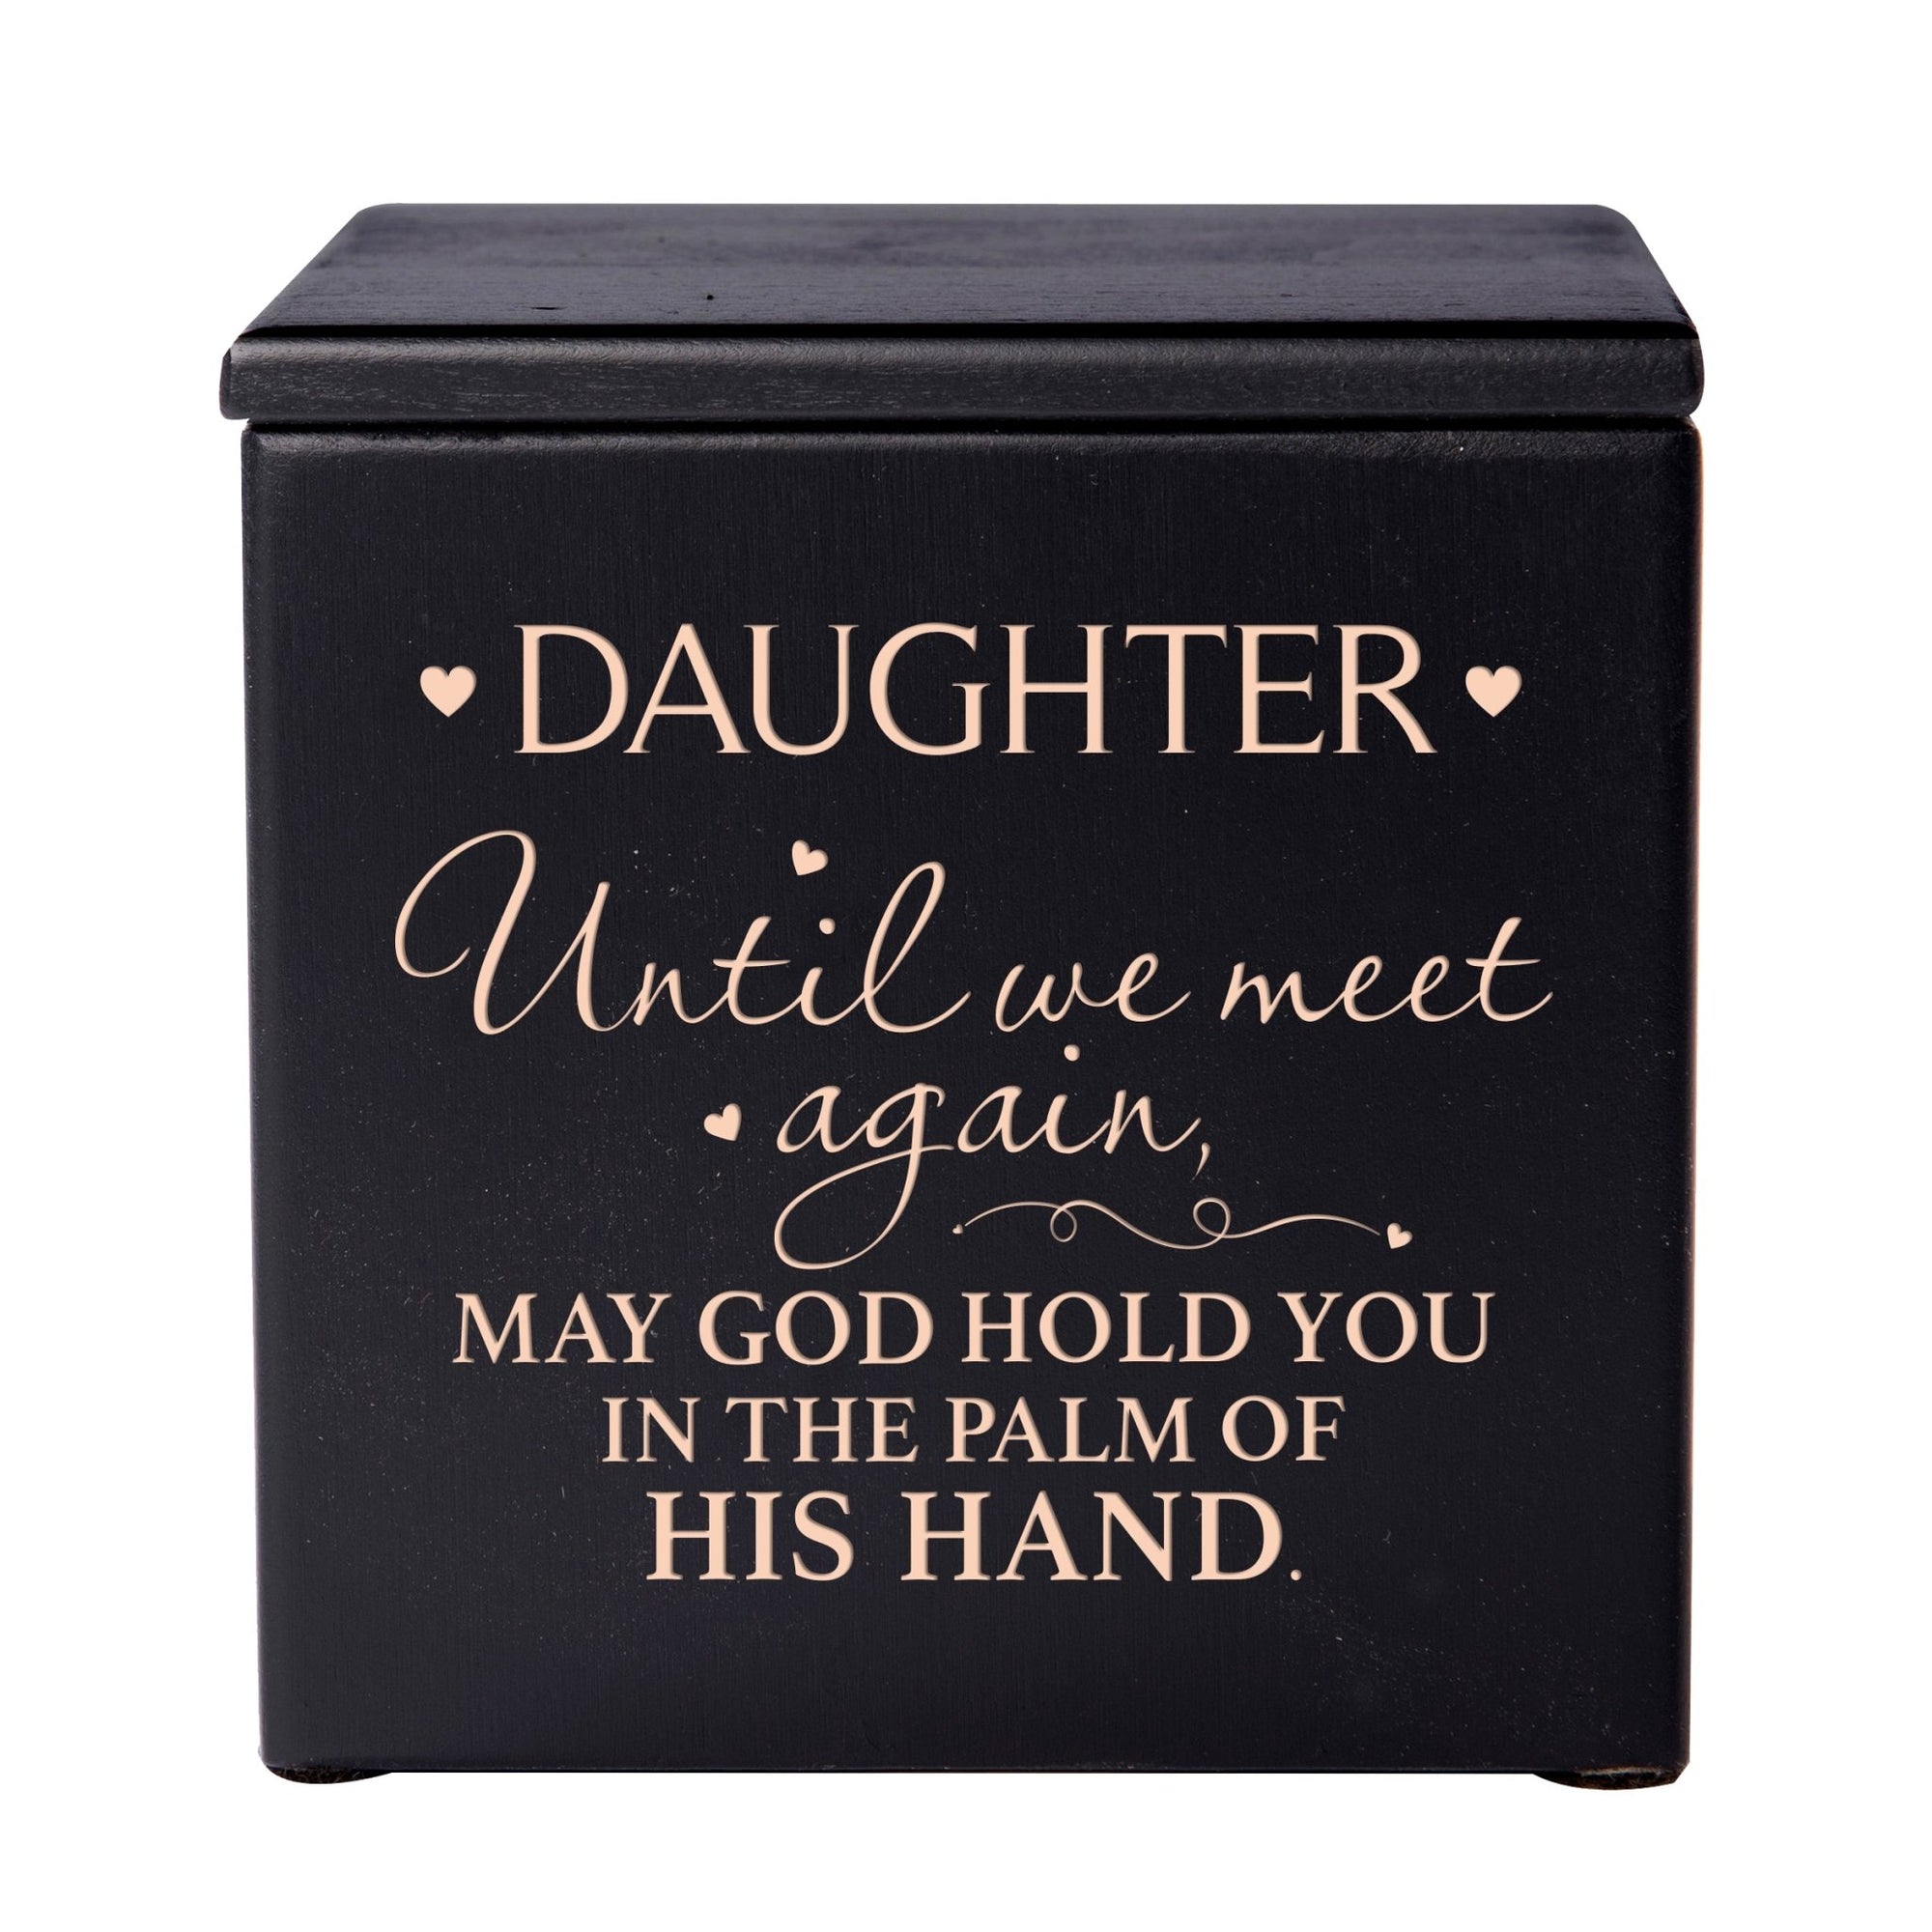 Modern Inspirational Memorial Wooden Cremation Urn Box 4.5x4.5in Holds 49 Cu Inches Of Human Ashes (Until We Meet Again Daughter) Funeral and Commemorative Keepsake - LifeSong Milestones